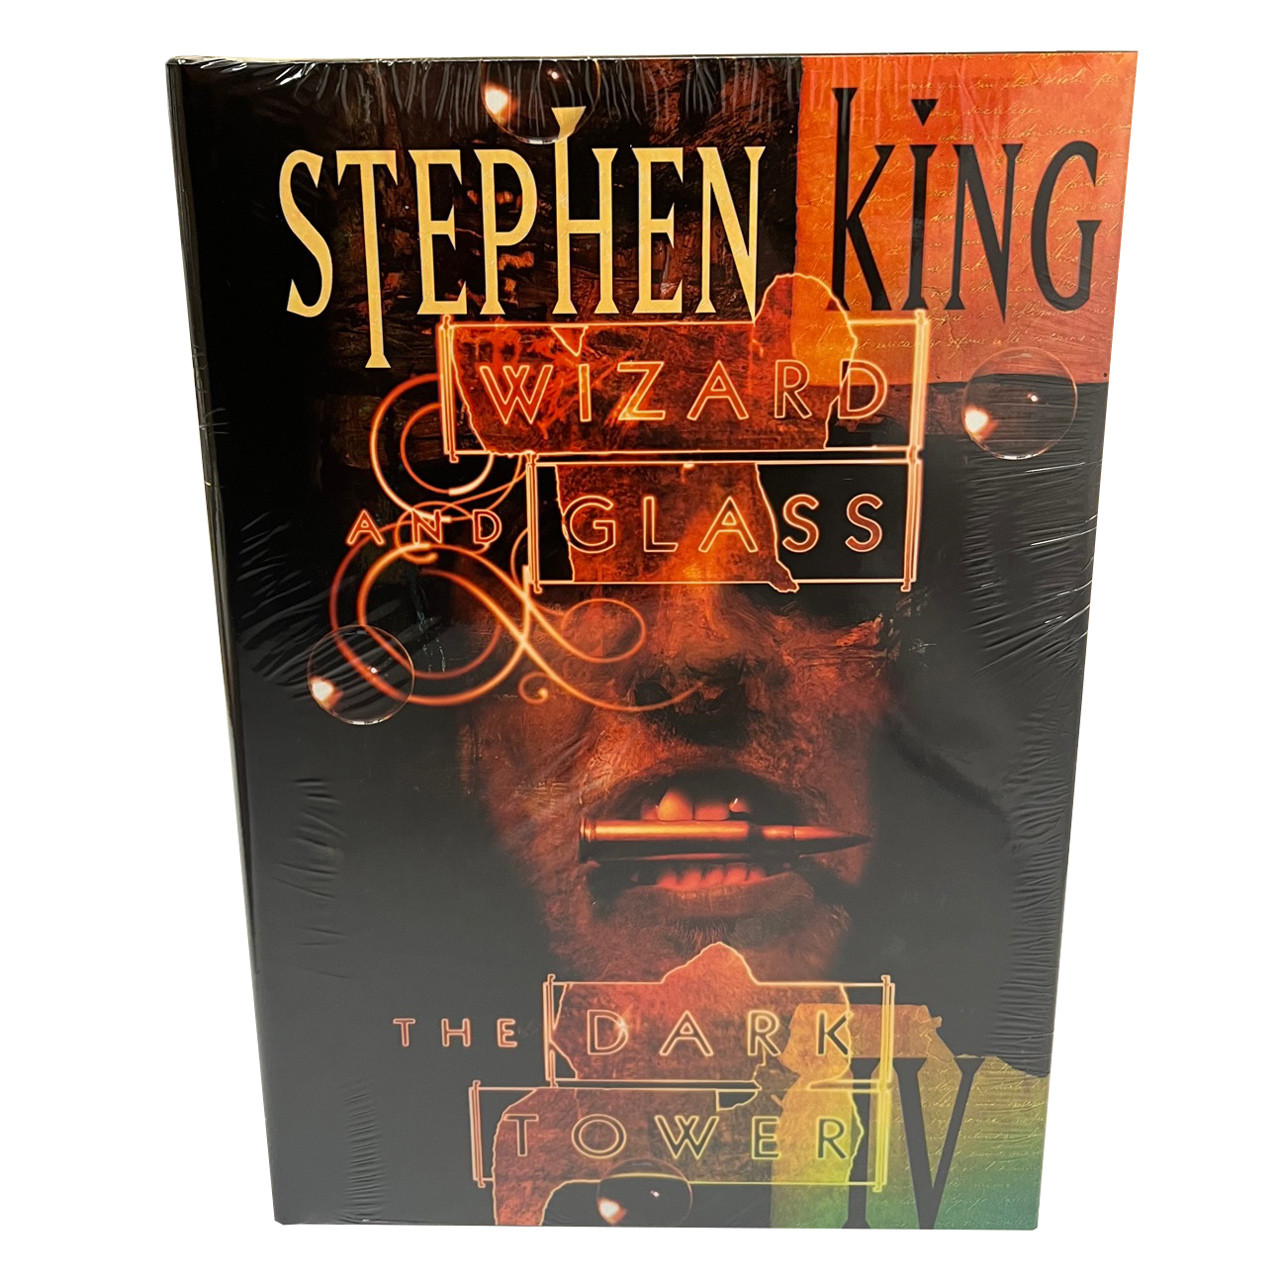 Stephen King "The Dark Tower IV: Wizard And Glass" First Edition, First Printing [Sealed/Original Box]